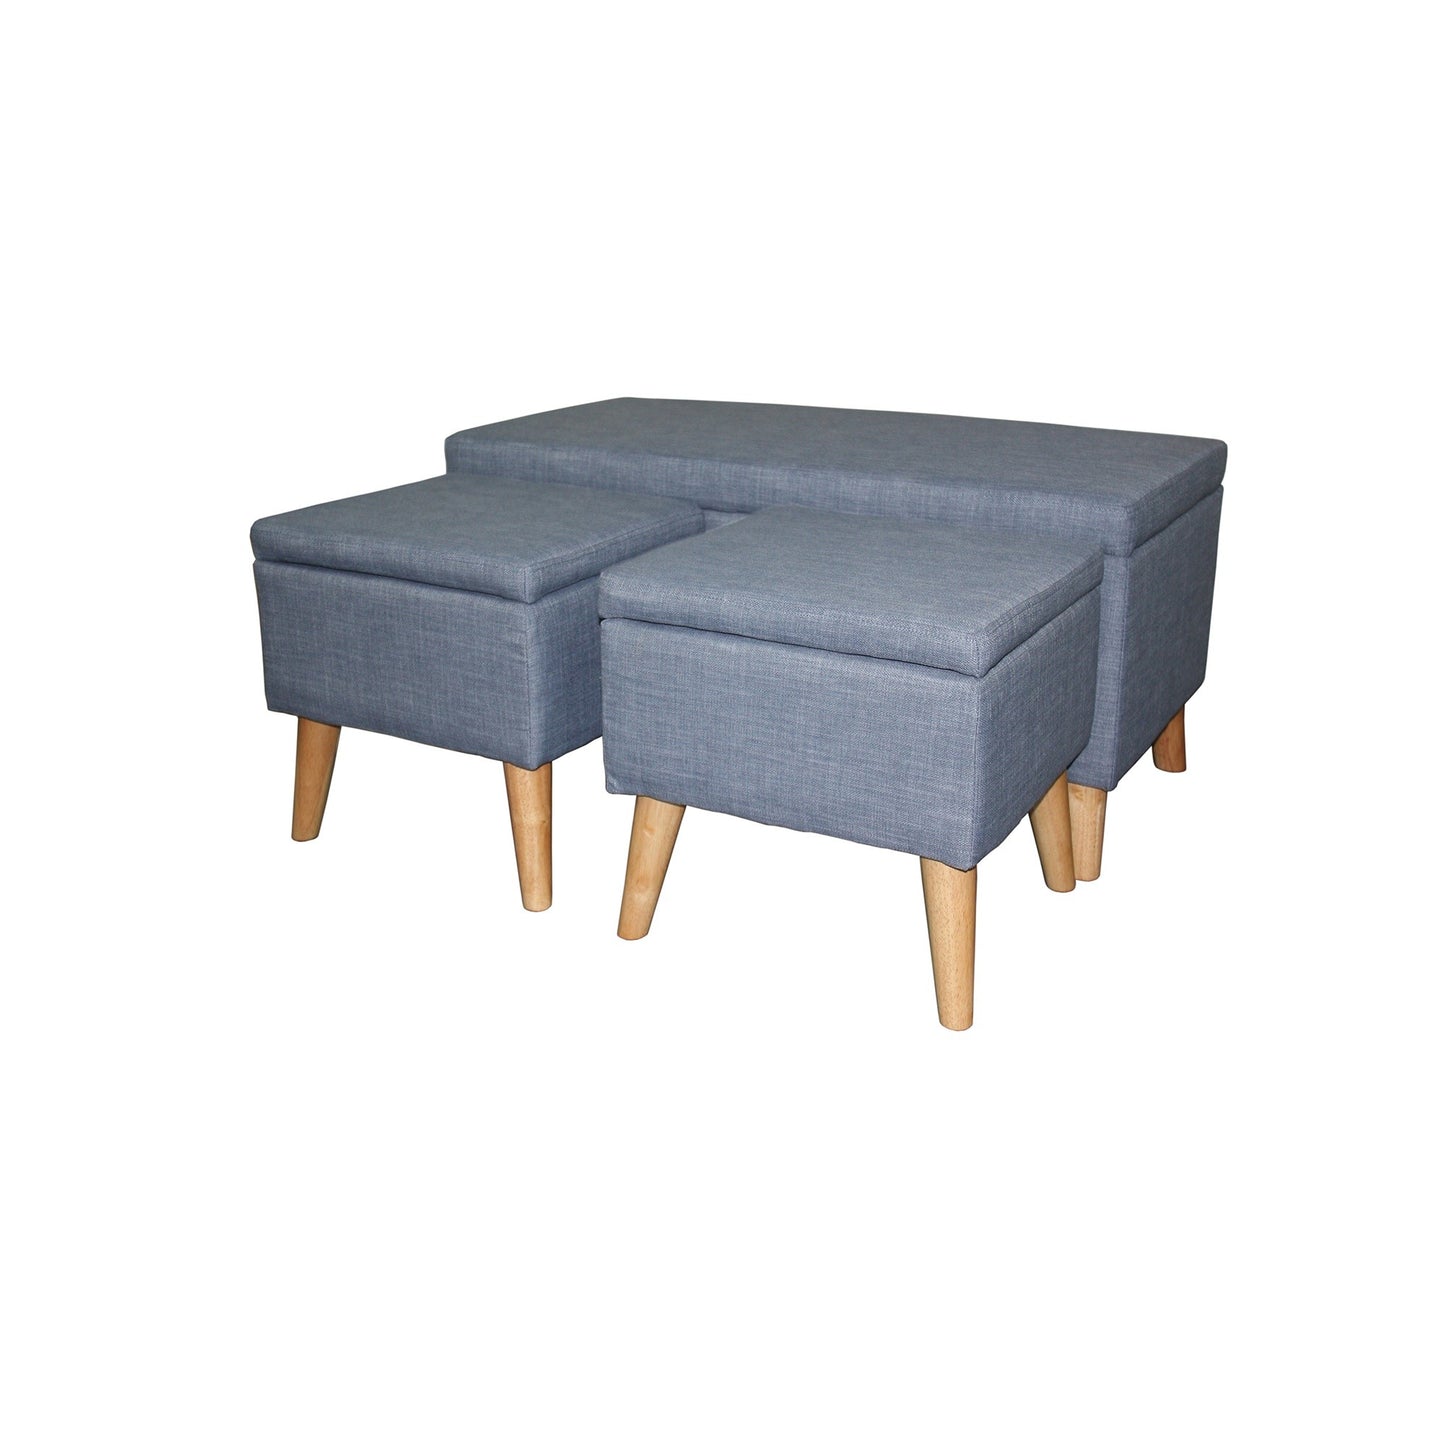 Blue Linen Look Storage Bench and Ottoman Three Piece Set By Homeroots